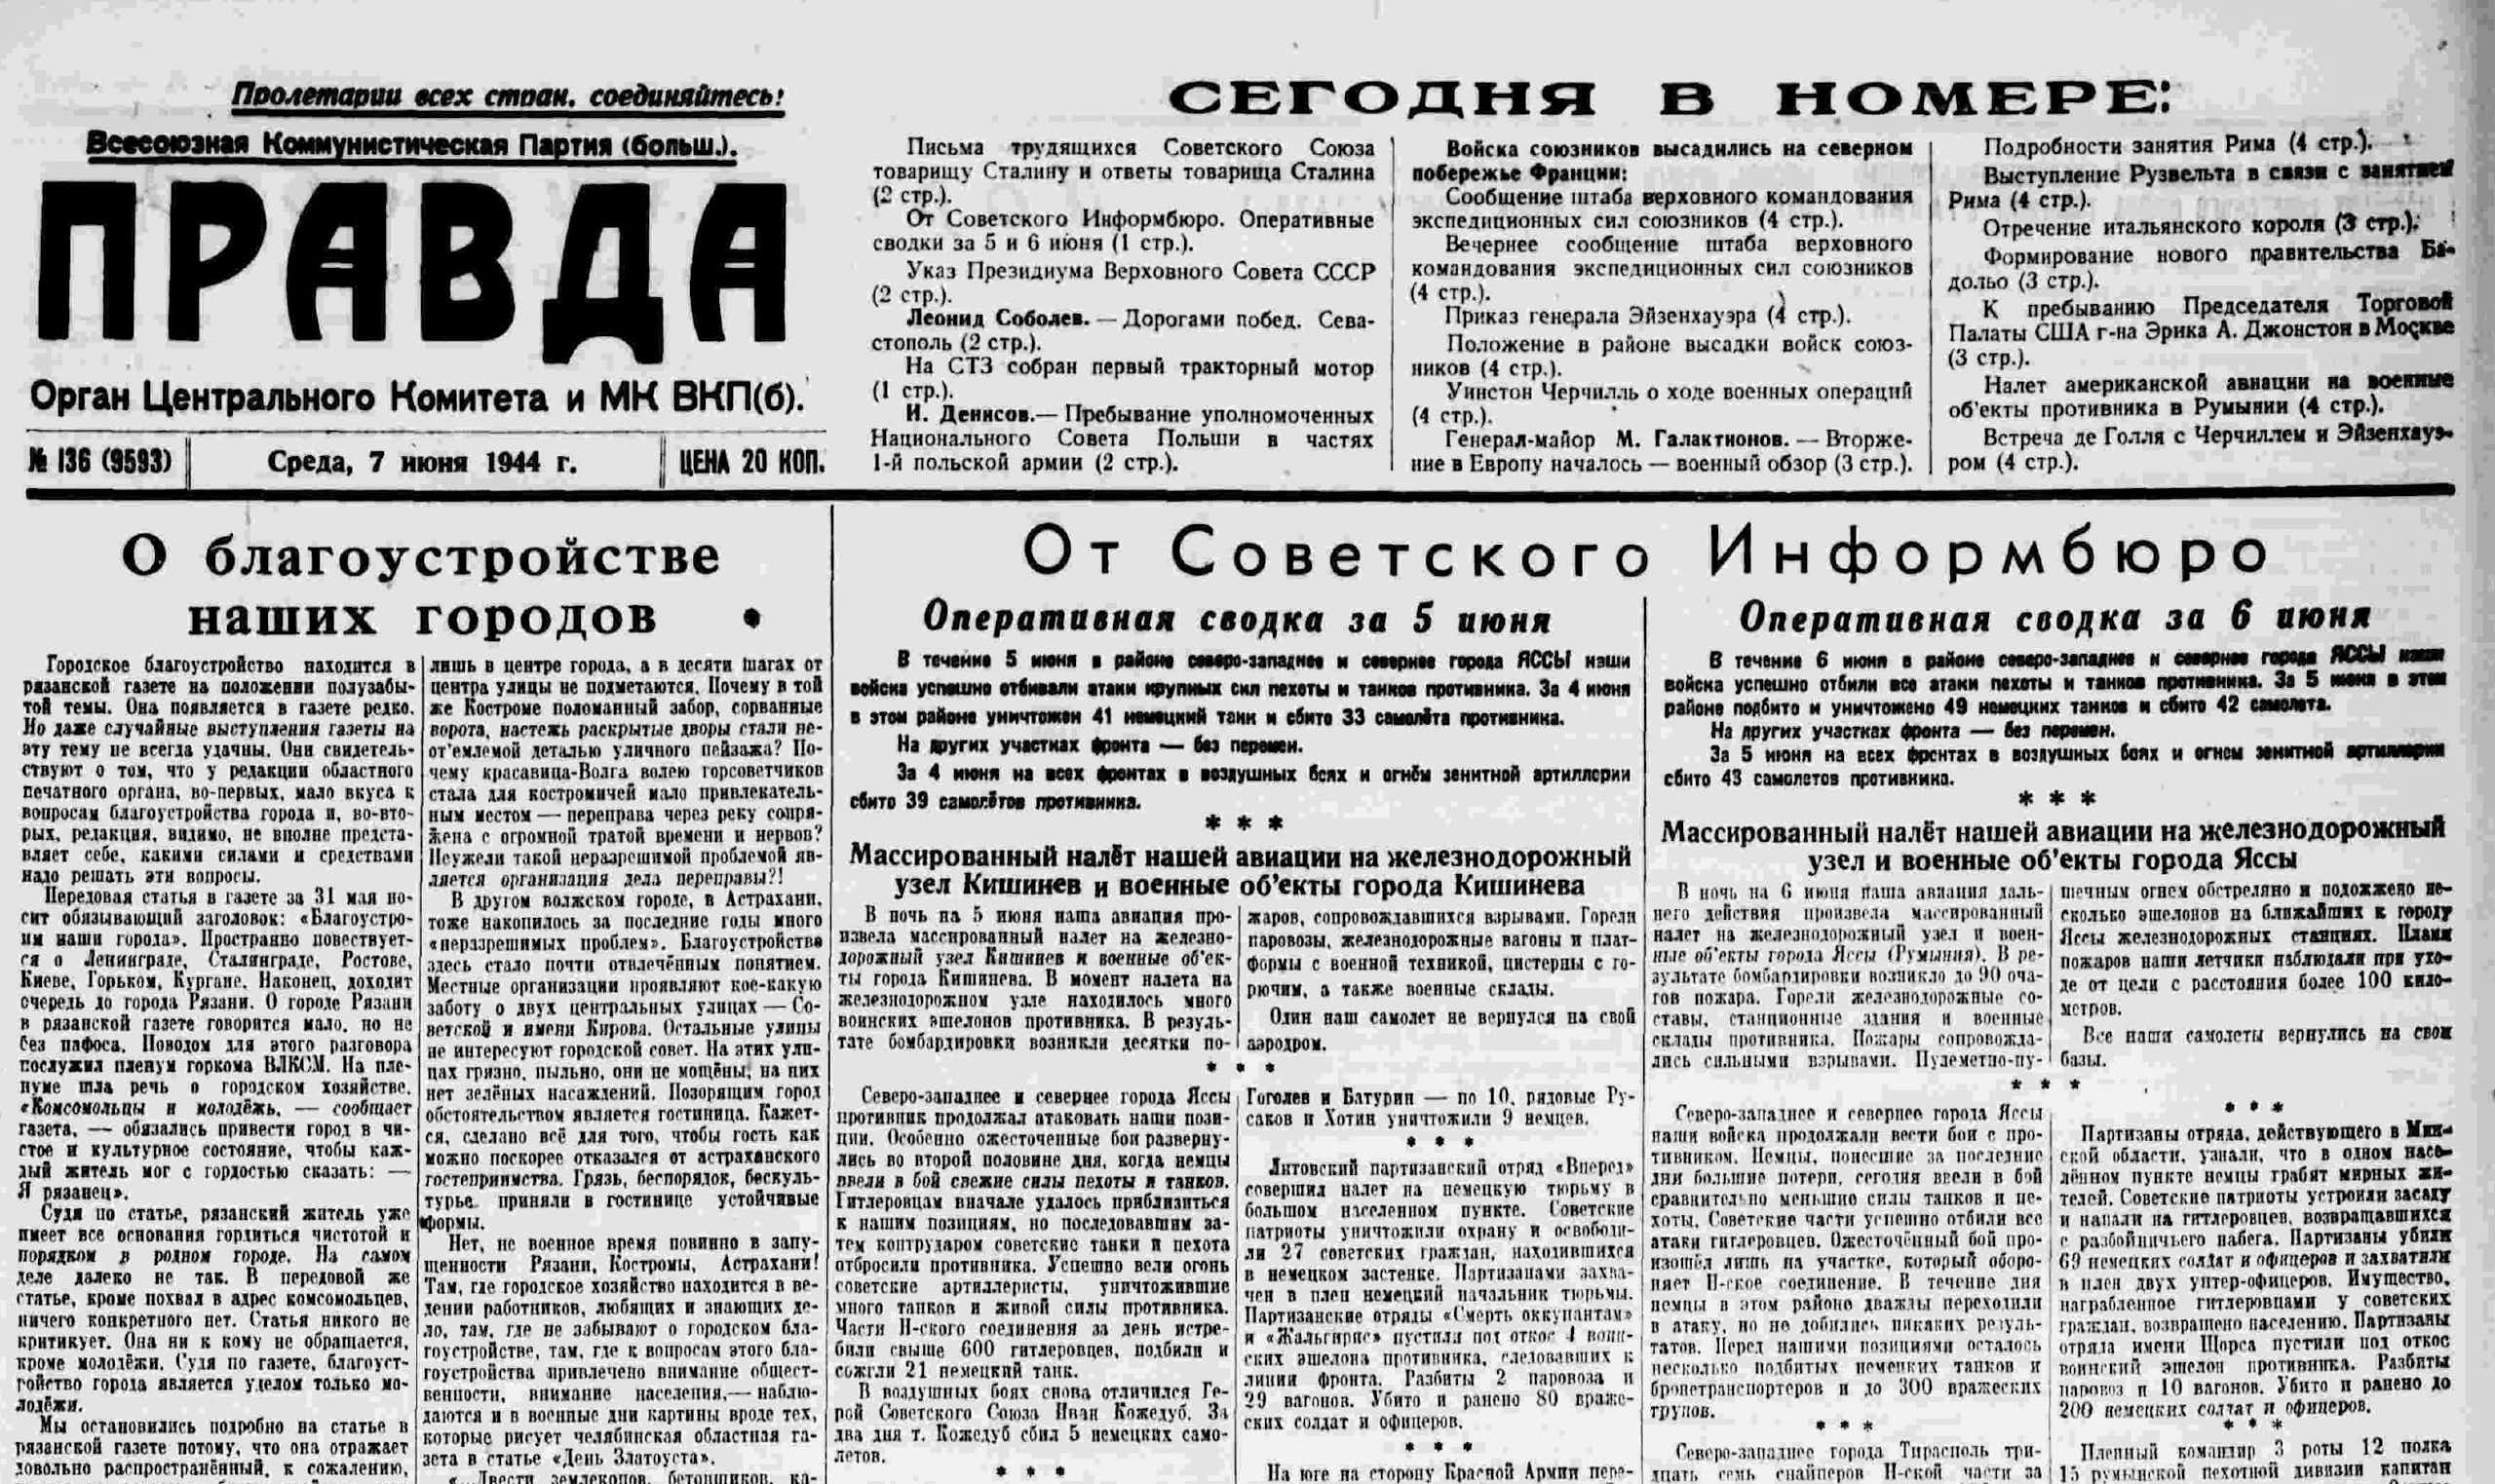 An image of the top half of a newspaper front page, printed in Cyrillic letters.